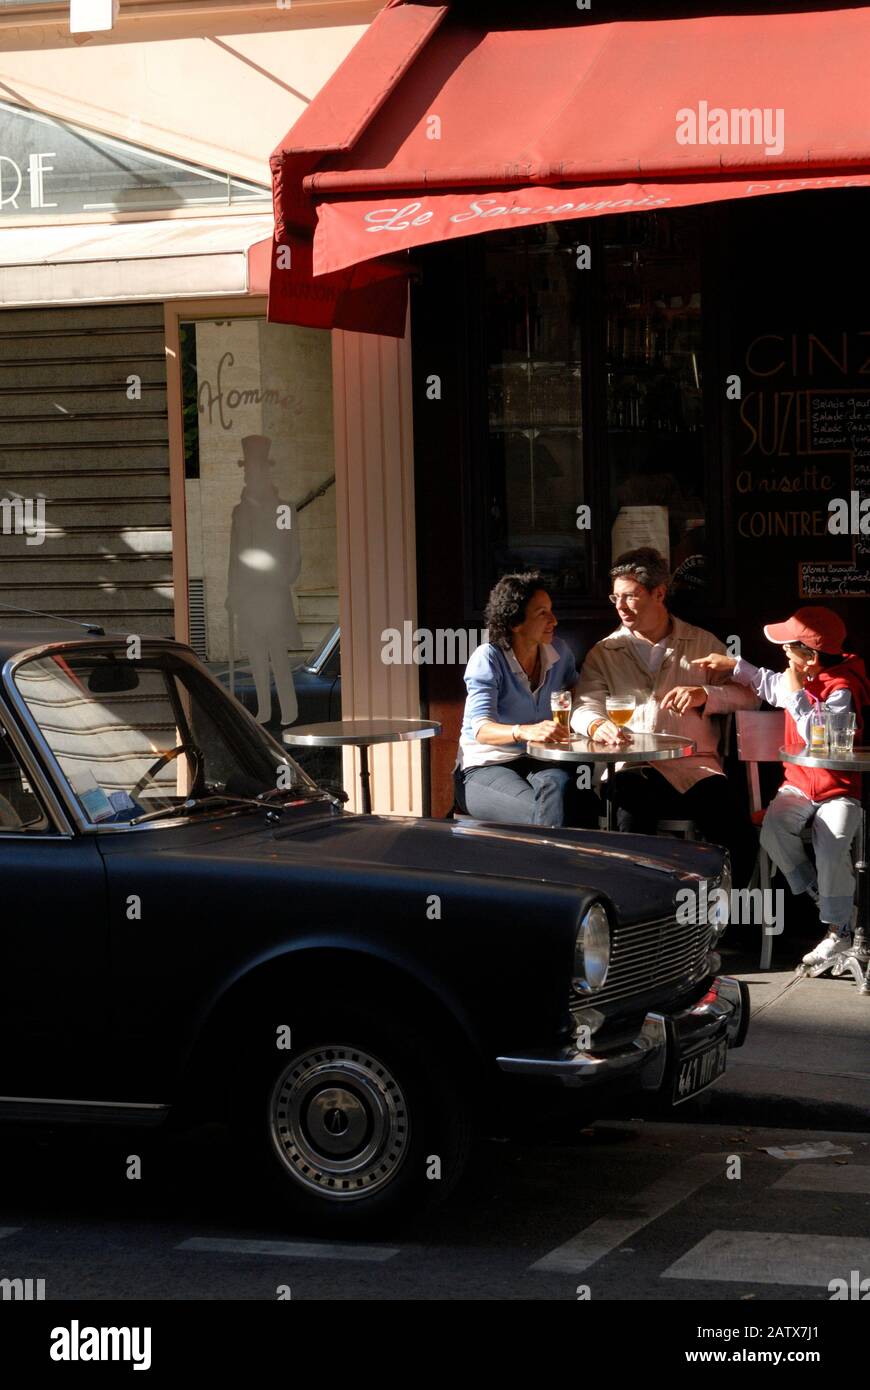 PARIS CAR AND CAFÉ TERRASSE - FAMILY HAVING A DRINK IN A SMALL PARIS CAFÉ WITH A SIMCA 1000 PARKED IN FRONT - STREET CAR PHOTOGRAPHY © F.BEAUMONT Stock Photo